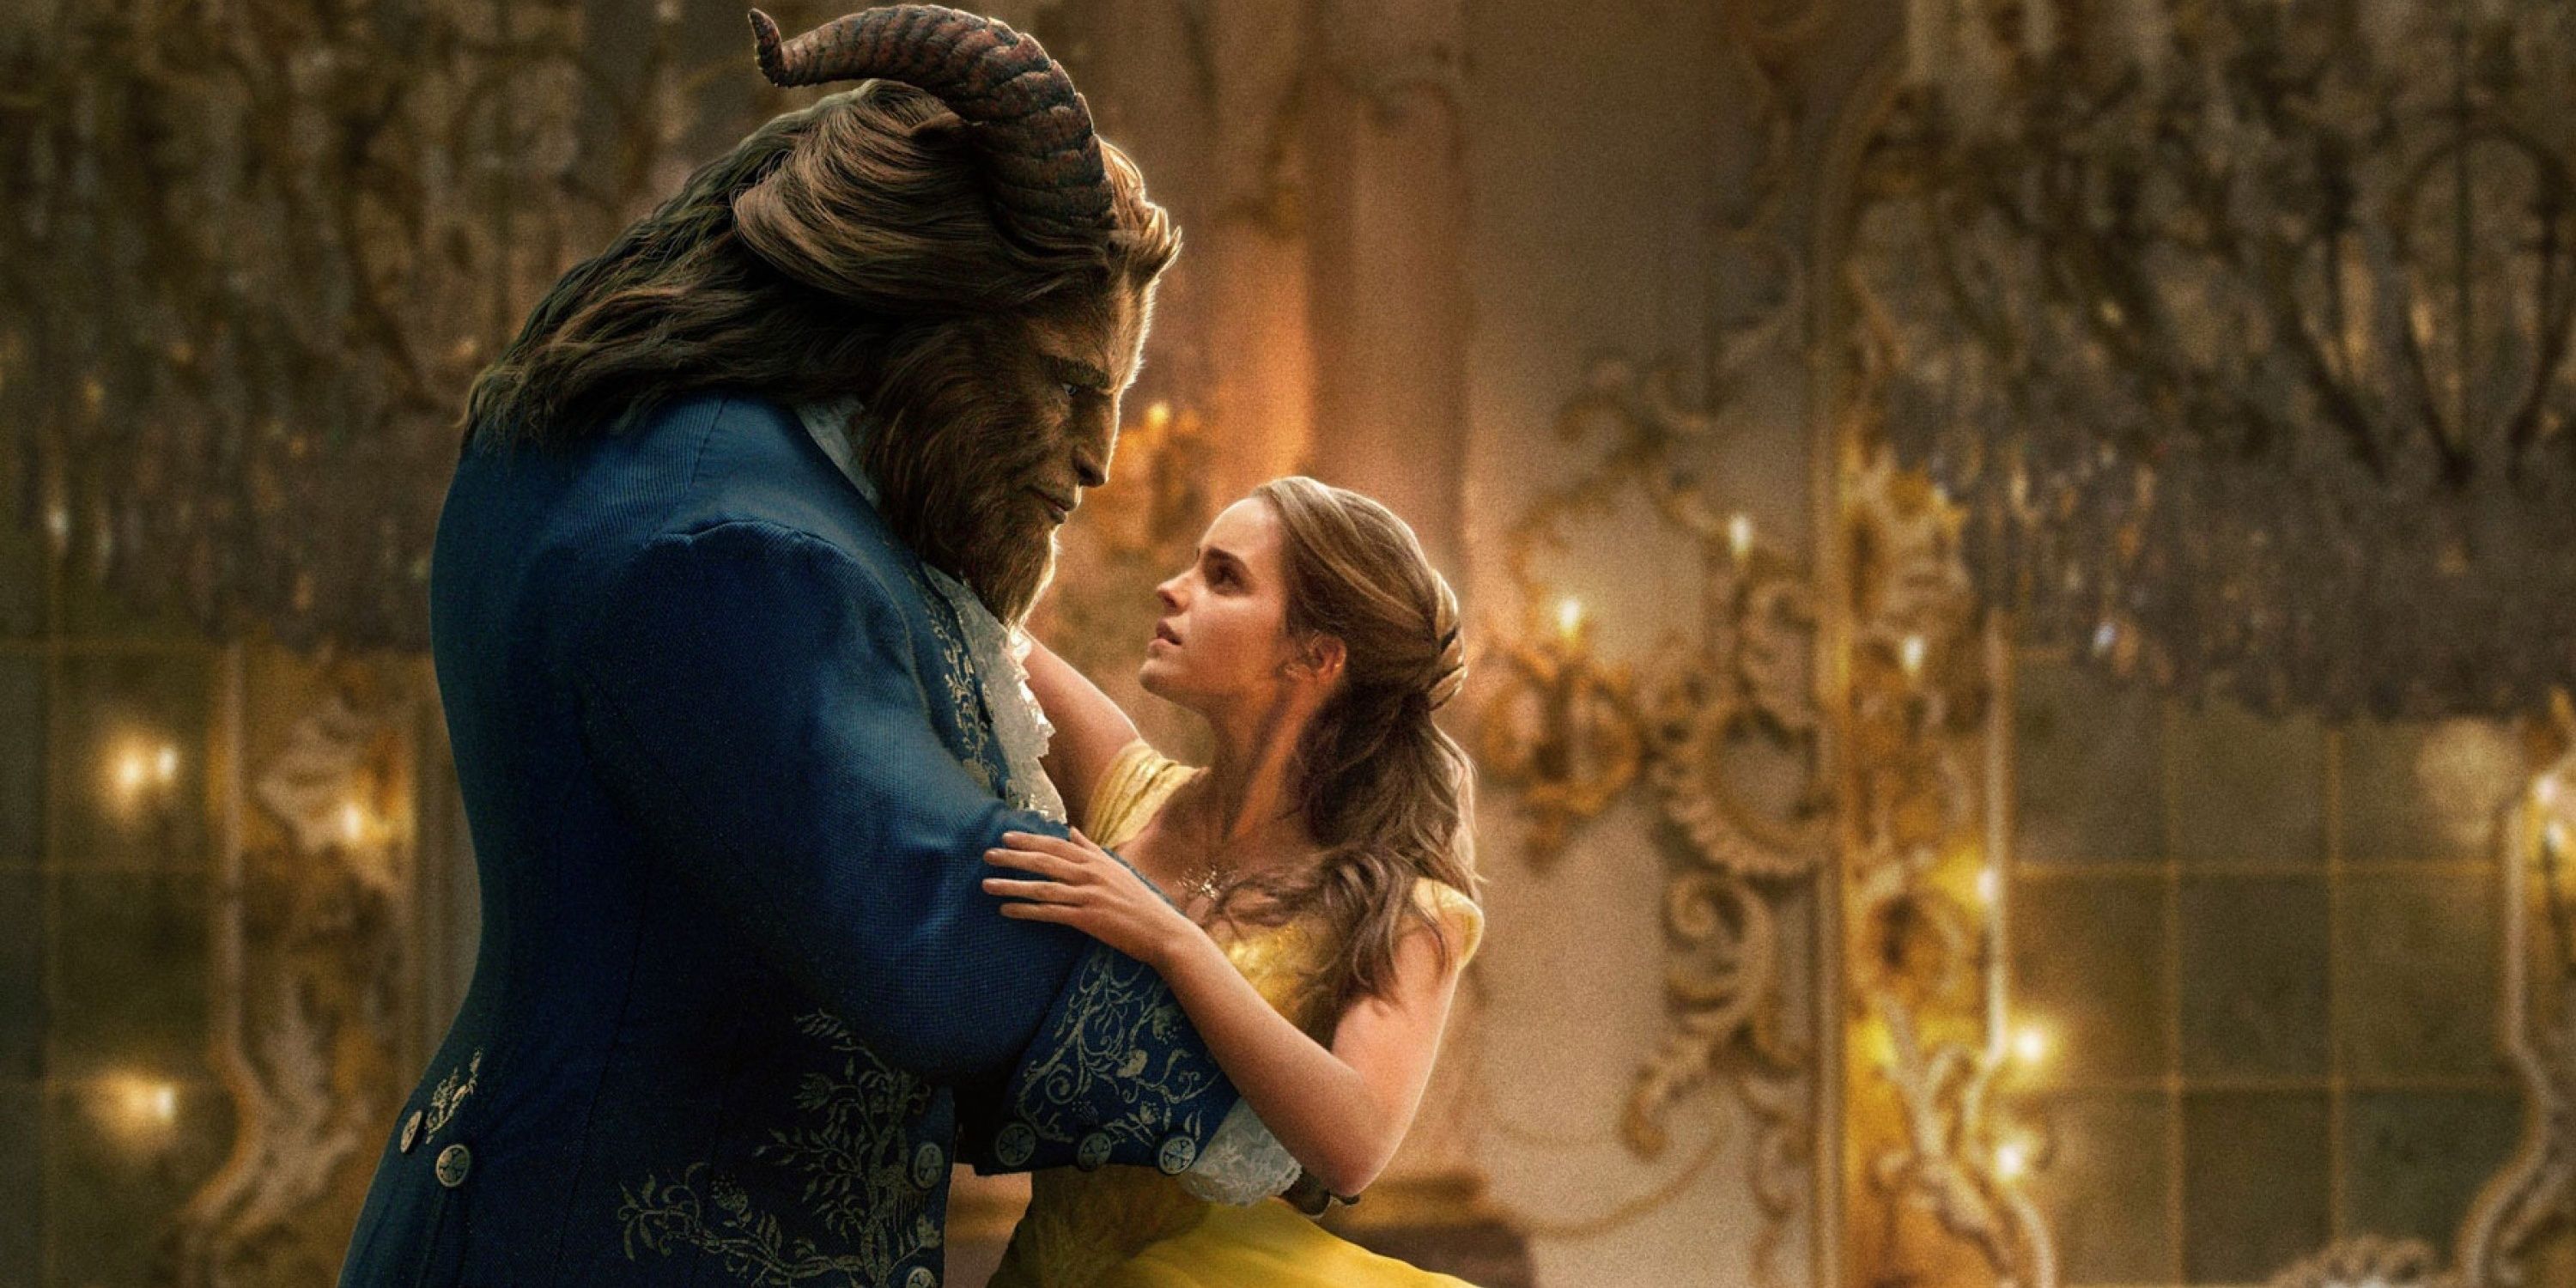 Princess Belle dancing with the Beast.